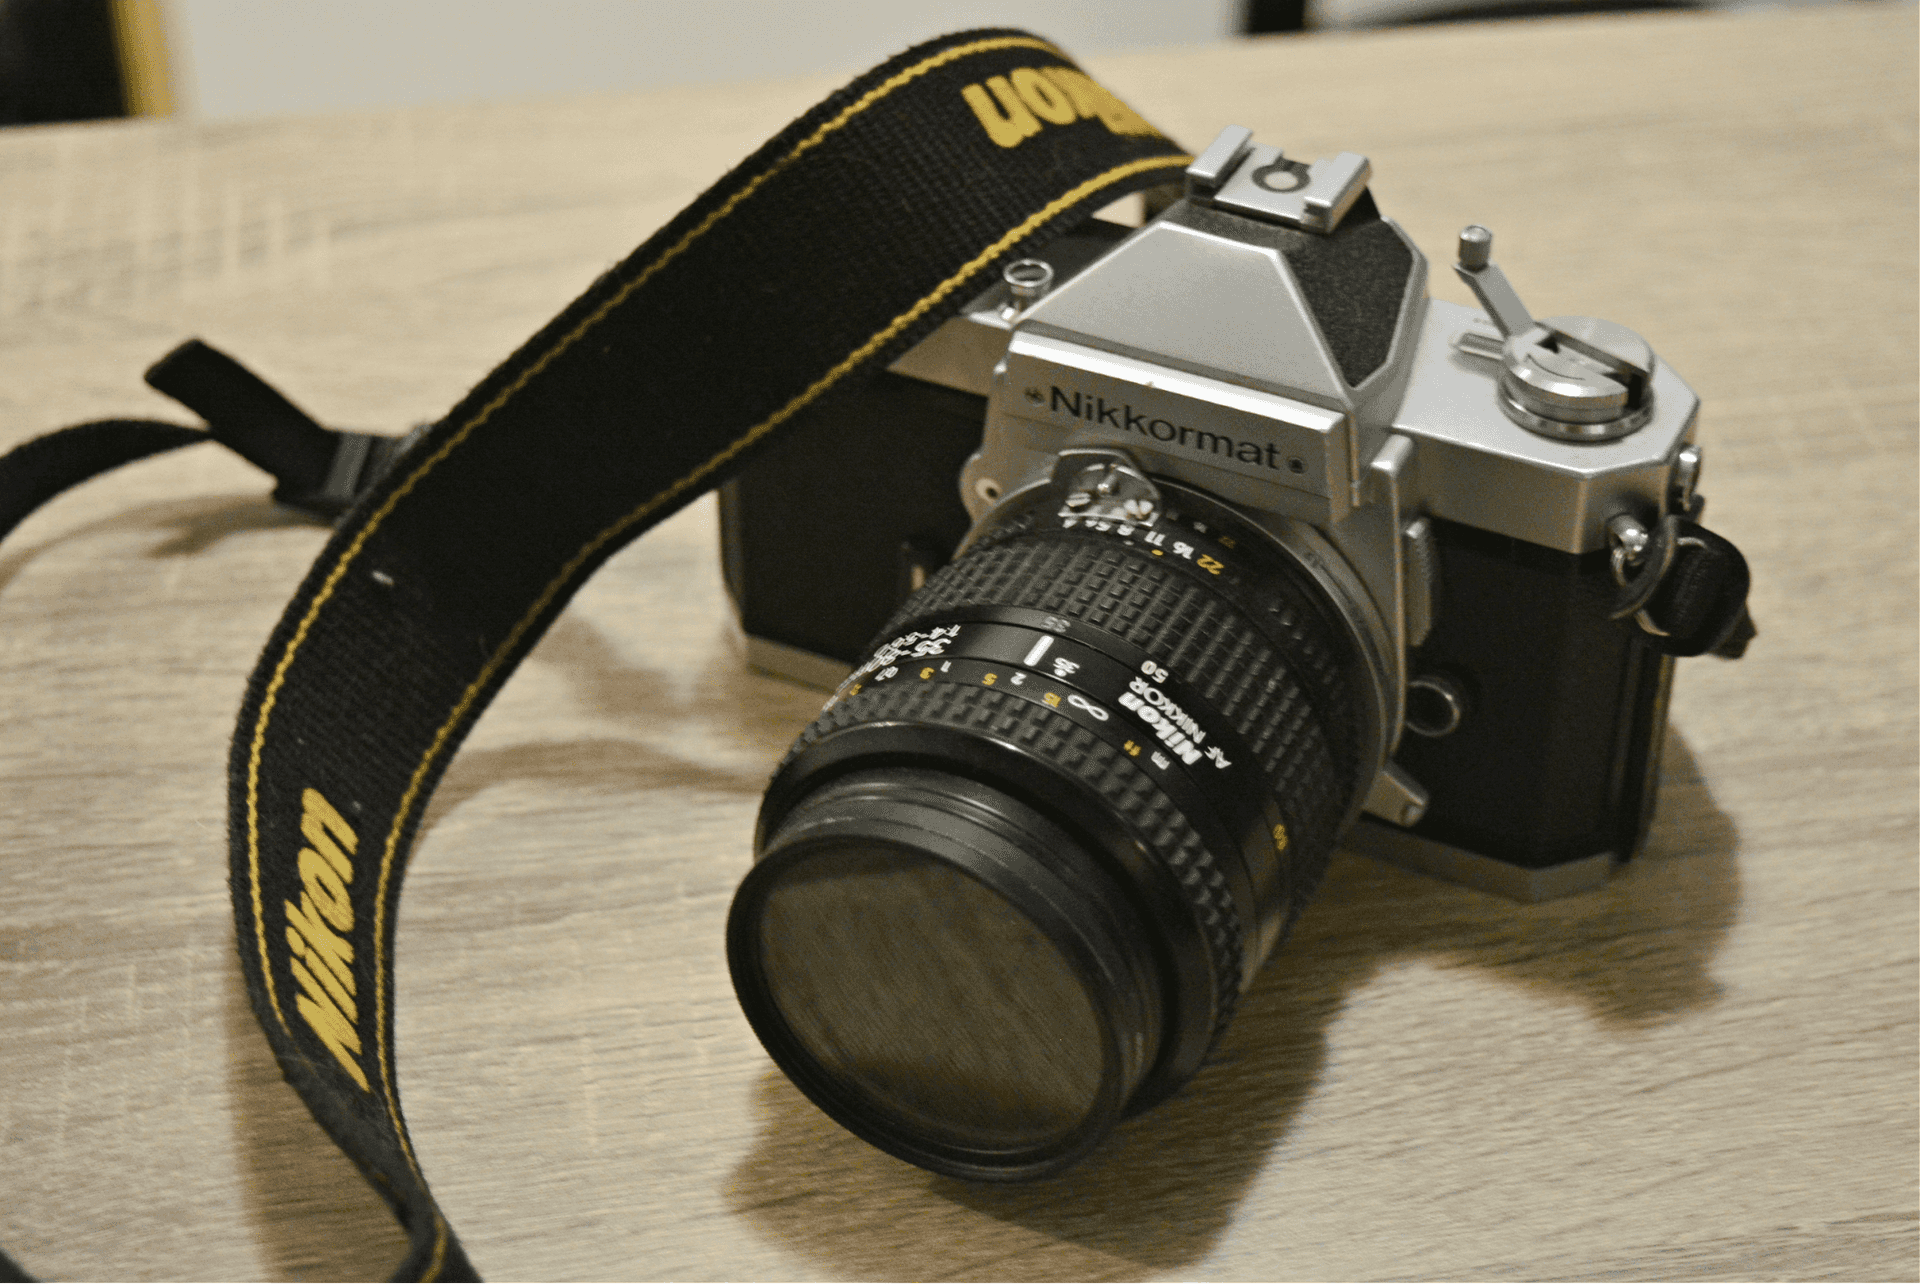 Our Nikkormat FT-2 - from the mid 1970s. These are known as an easy entry level film camera for those new to the craft. We have been honing our film photography skills on this model and she has never failed us!